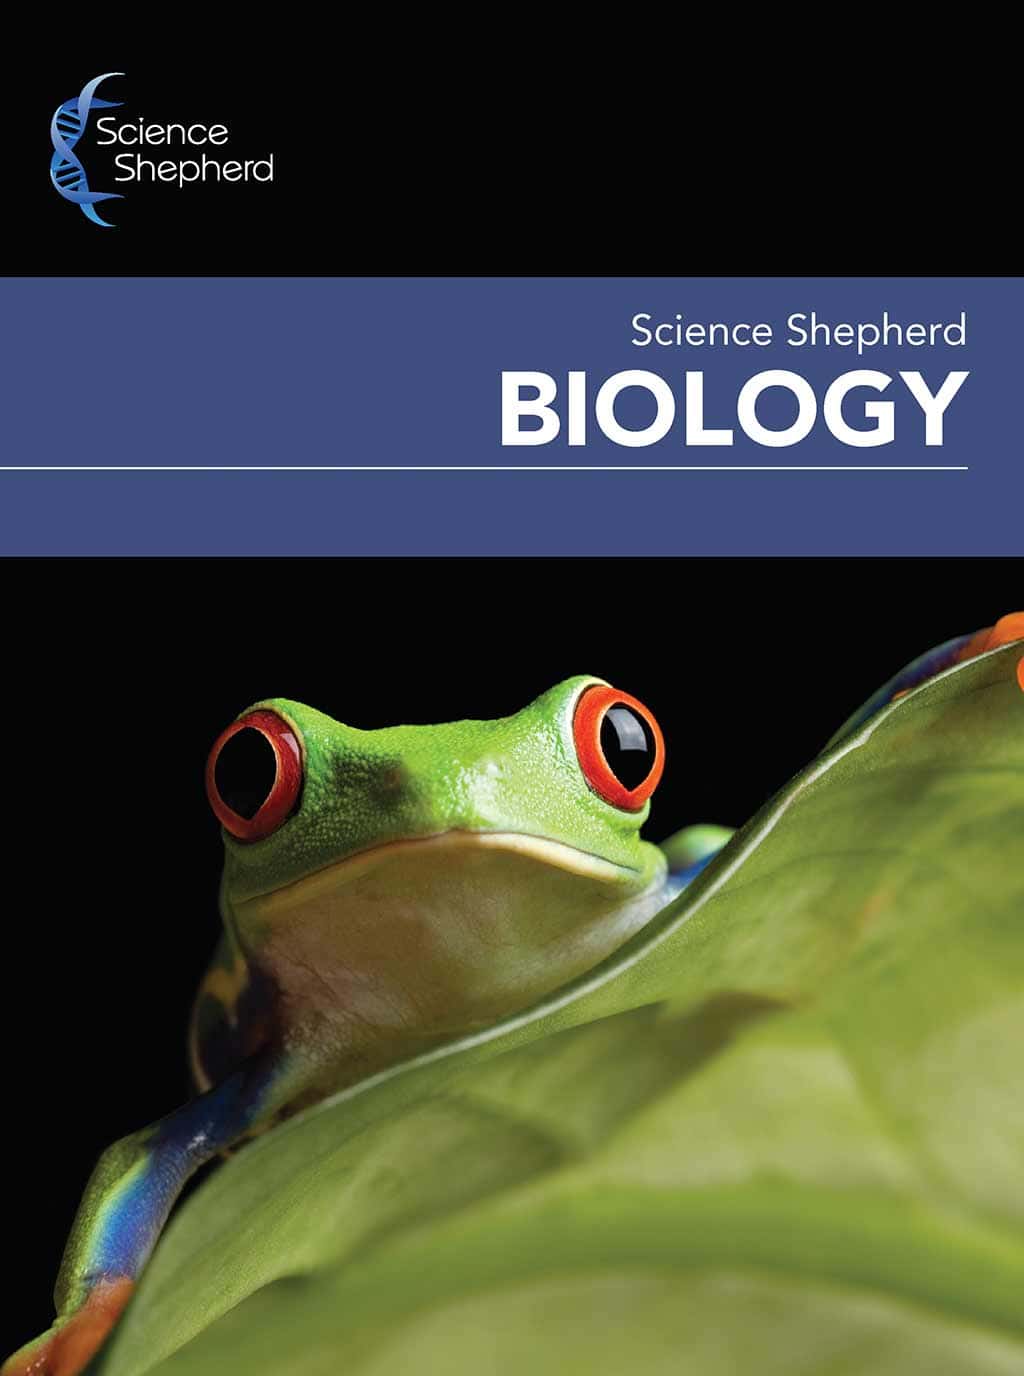 Homeschool Biology curriculum cover of a green tree frog on a leaf